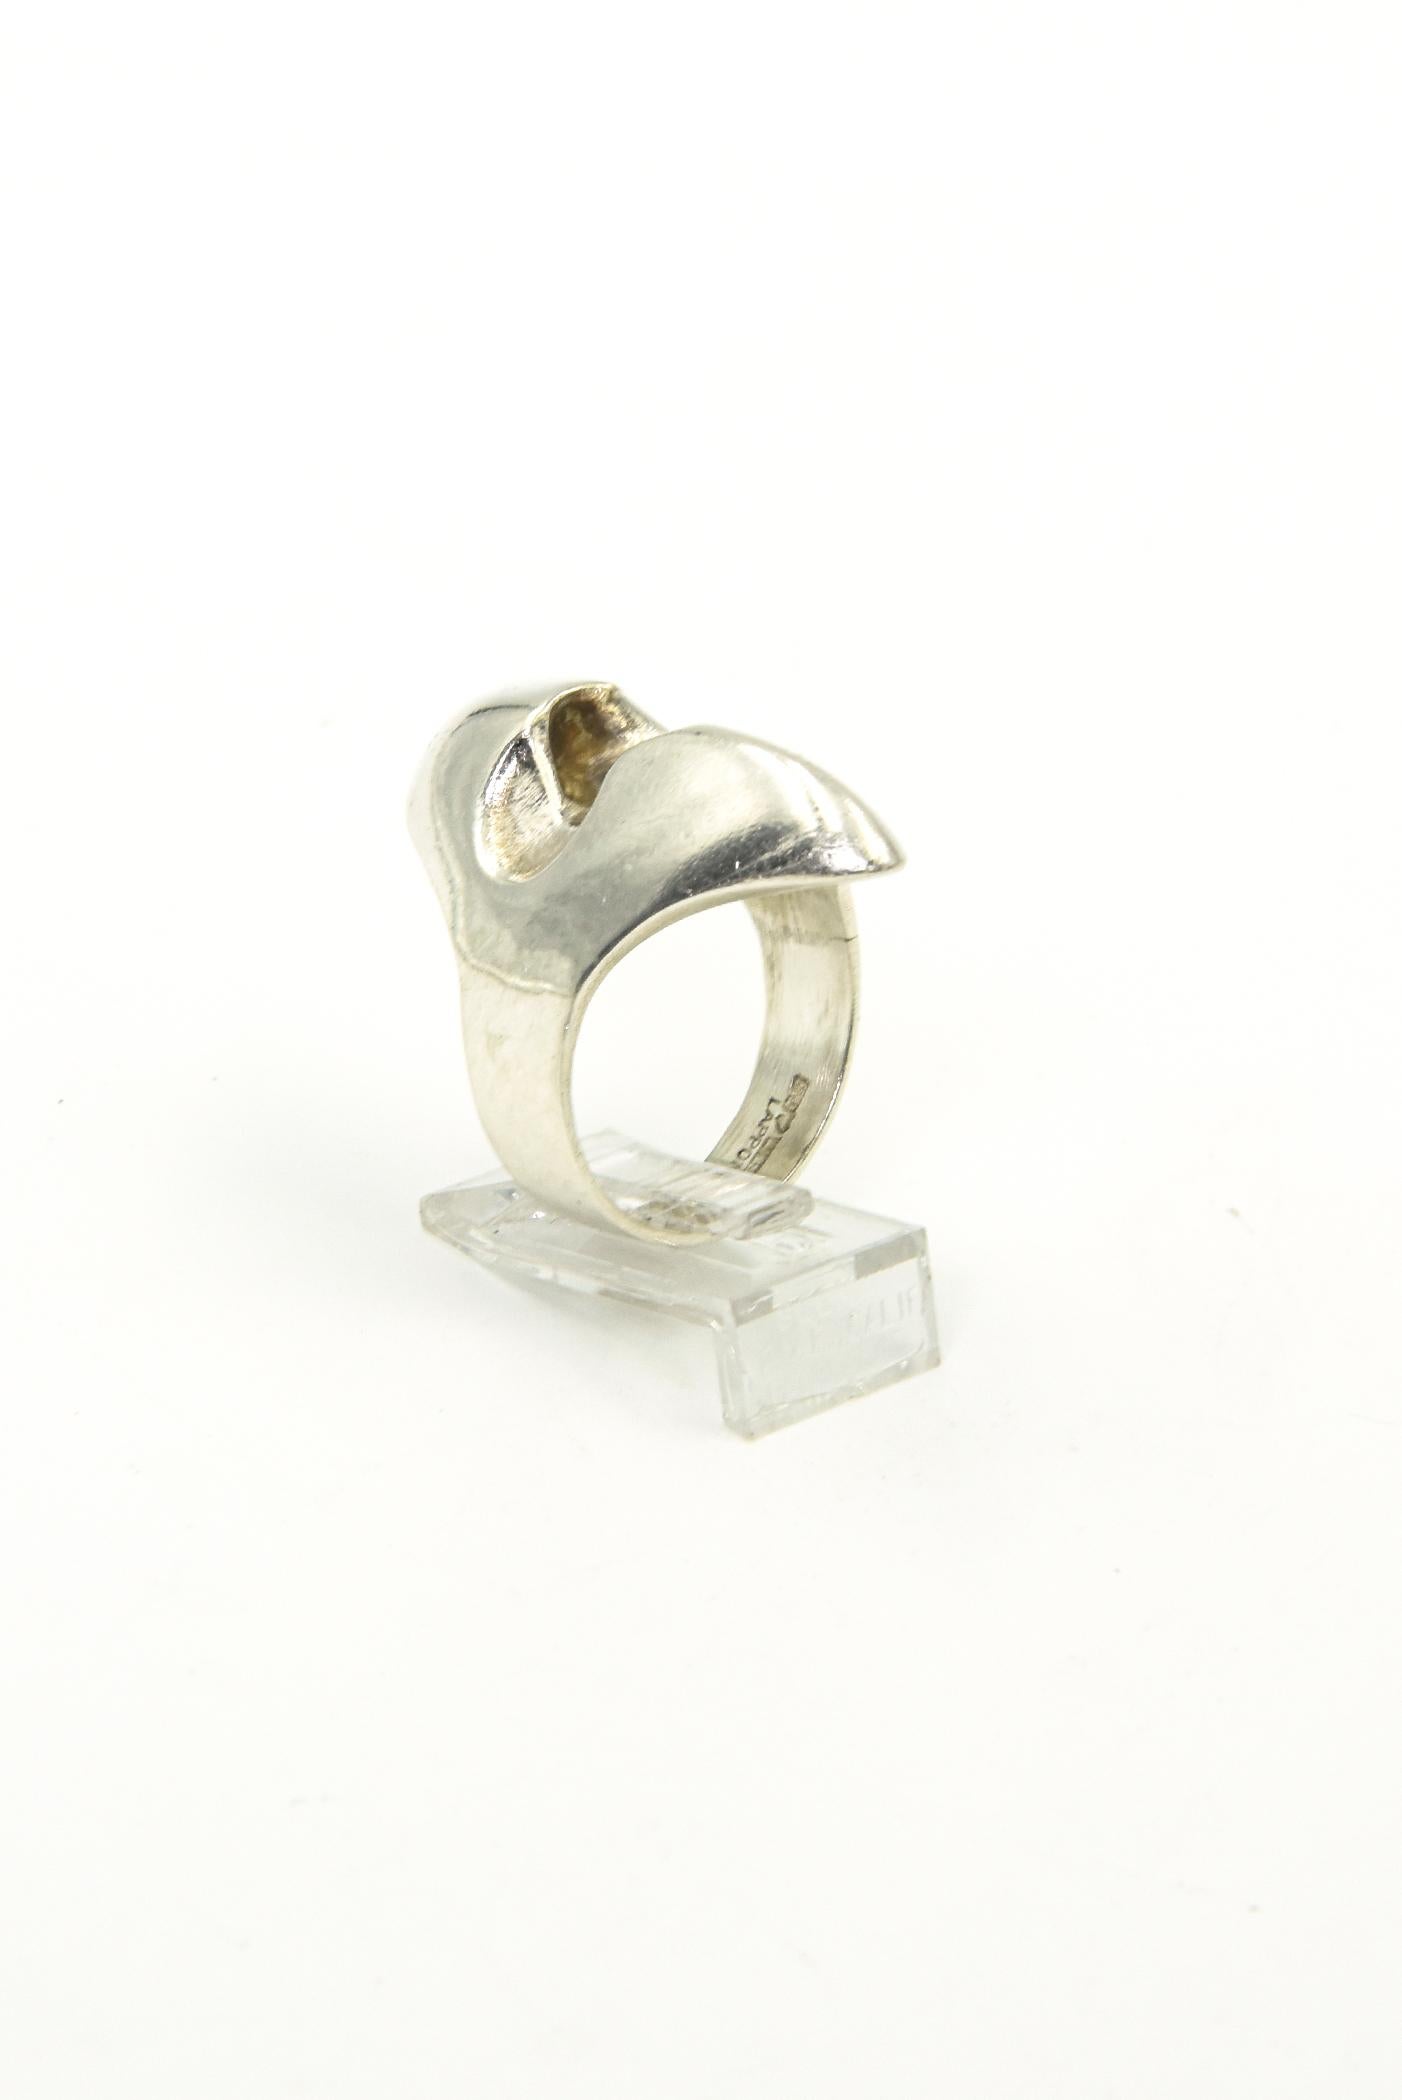 Lapponia Sterling Silver Abstract Ring by Björn Weckström In Good Condition For Sale In Miami Beach, FL